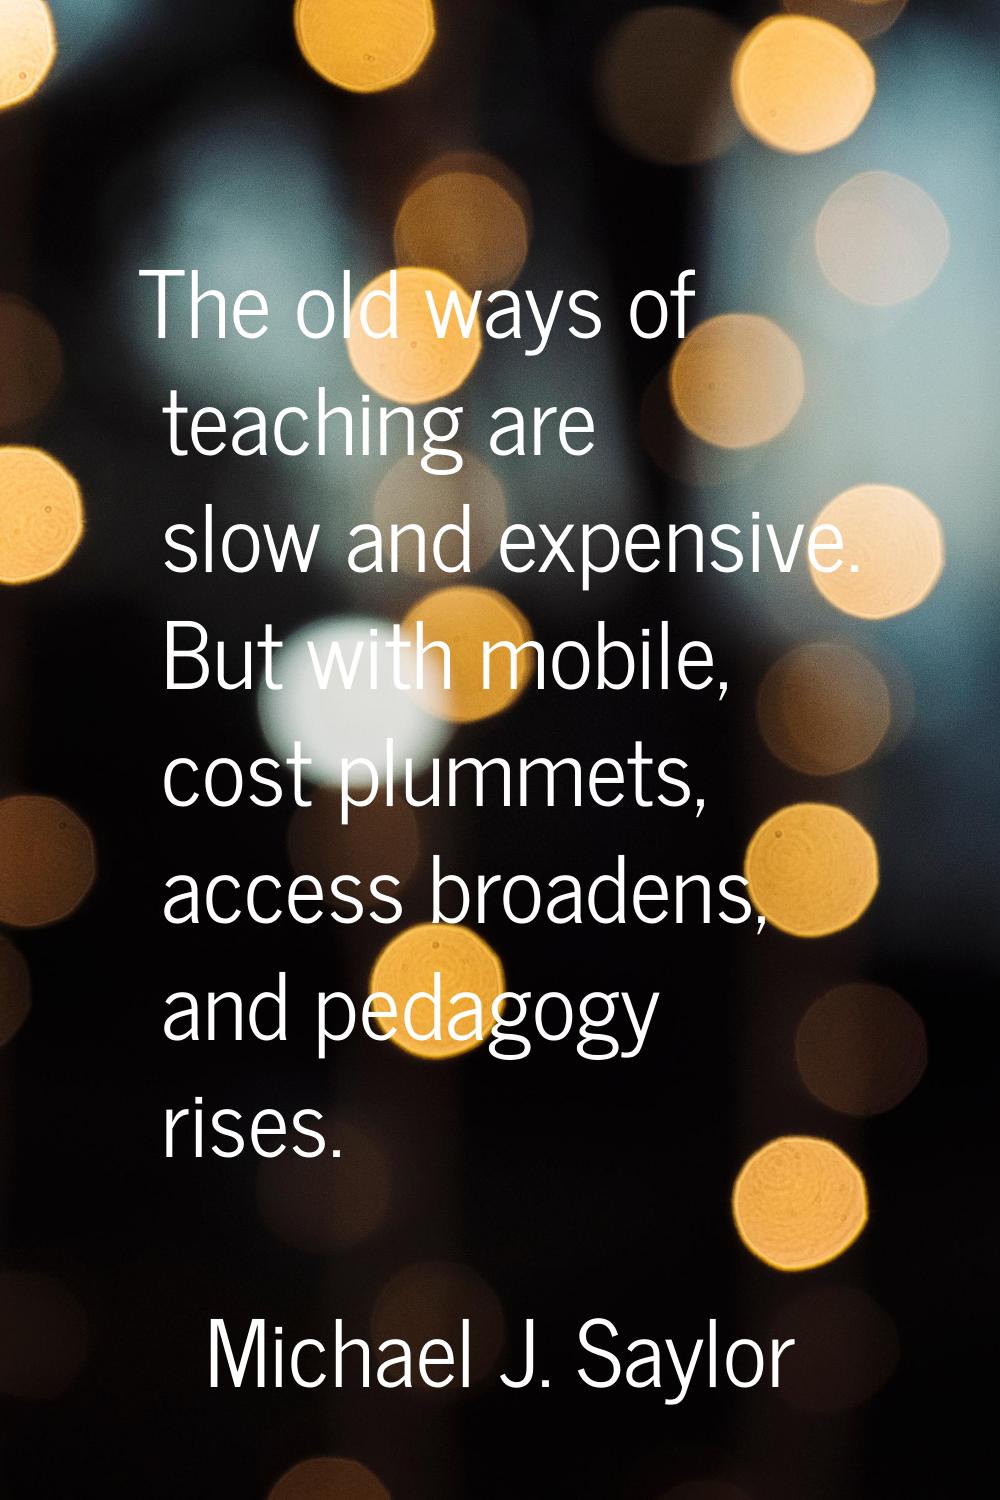 The old ways of teaching are slow and expensive. But with mobile, cost plummets, access broadens, a